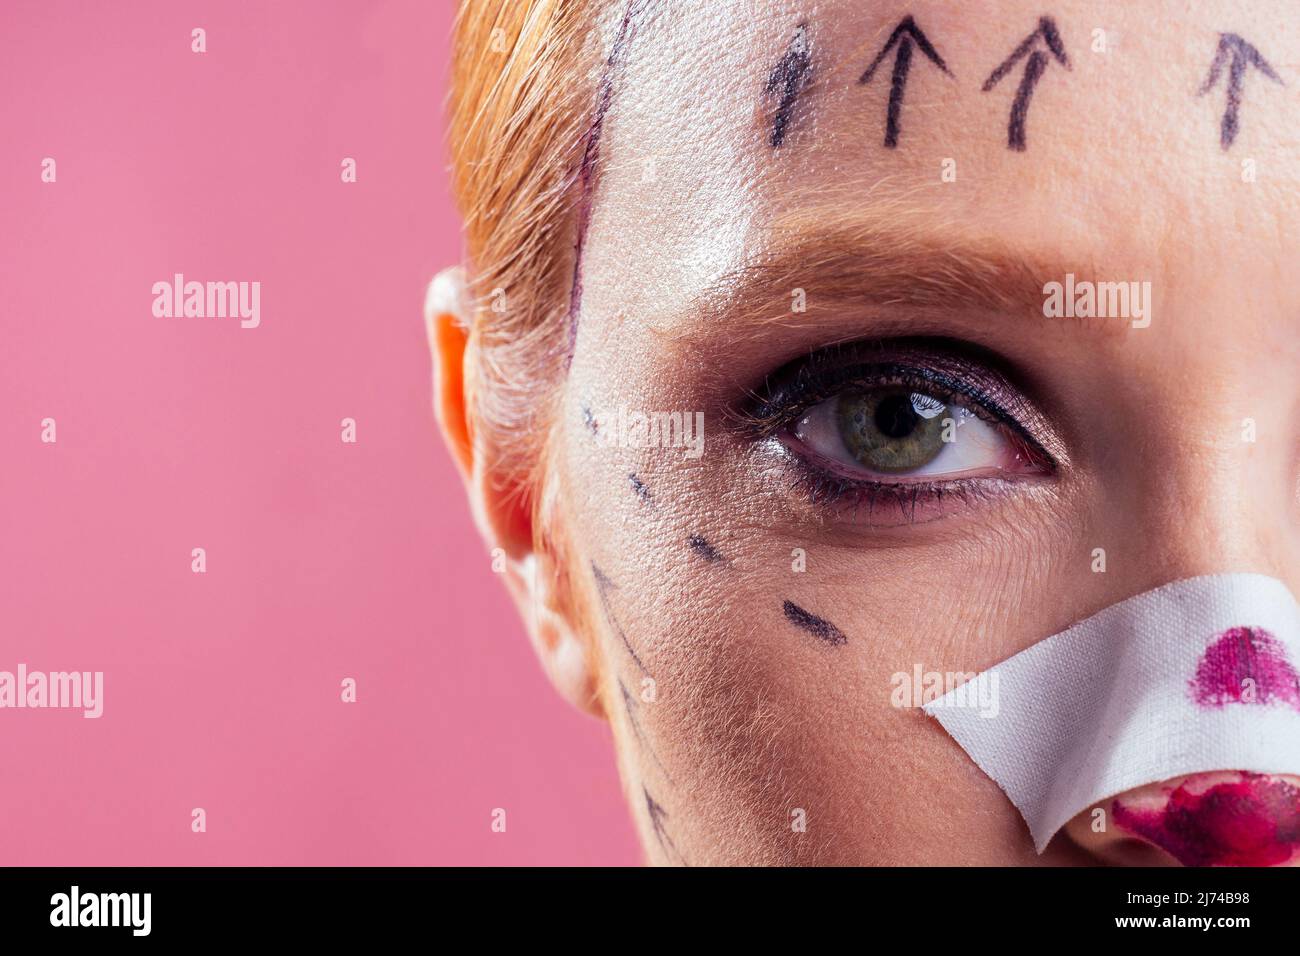 Patient in bandages. Nurses and young woman in studio pink background Stock Photo